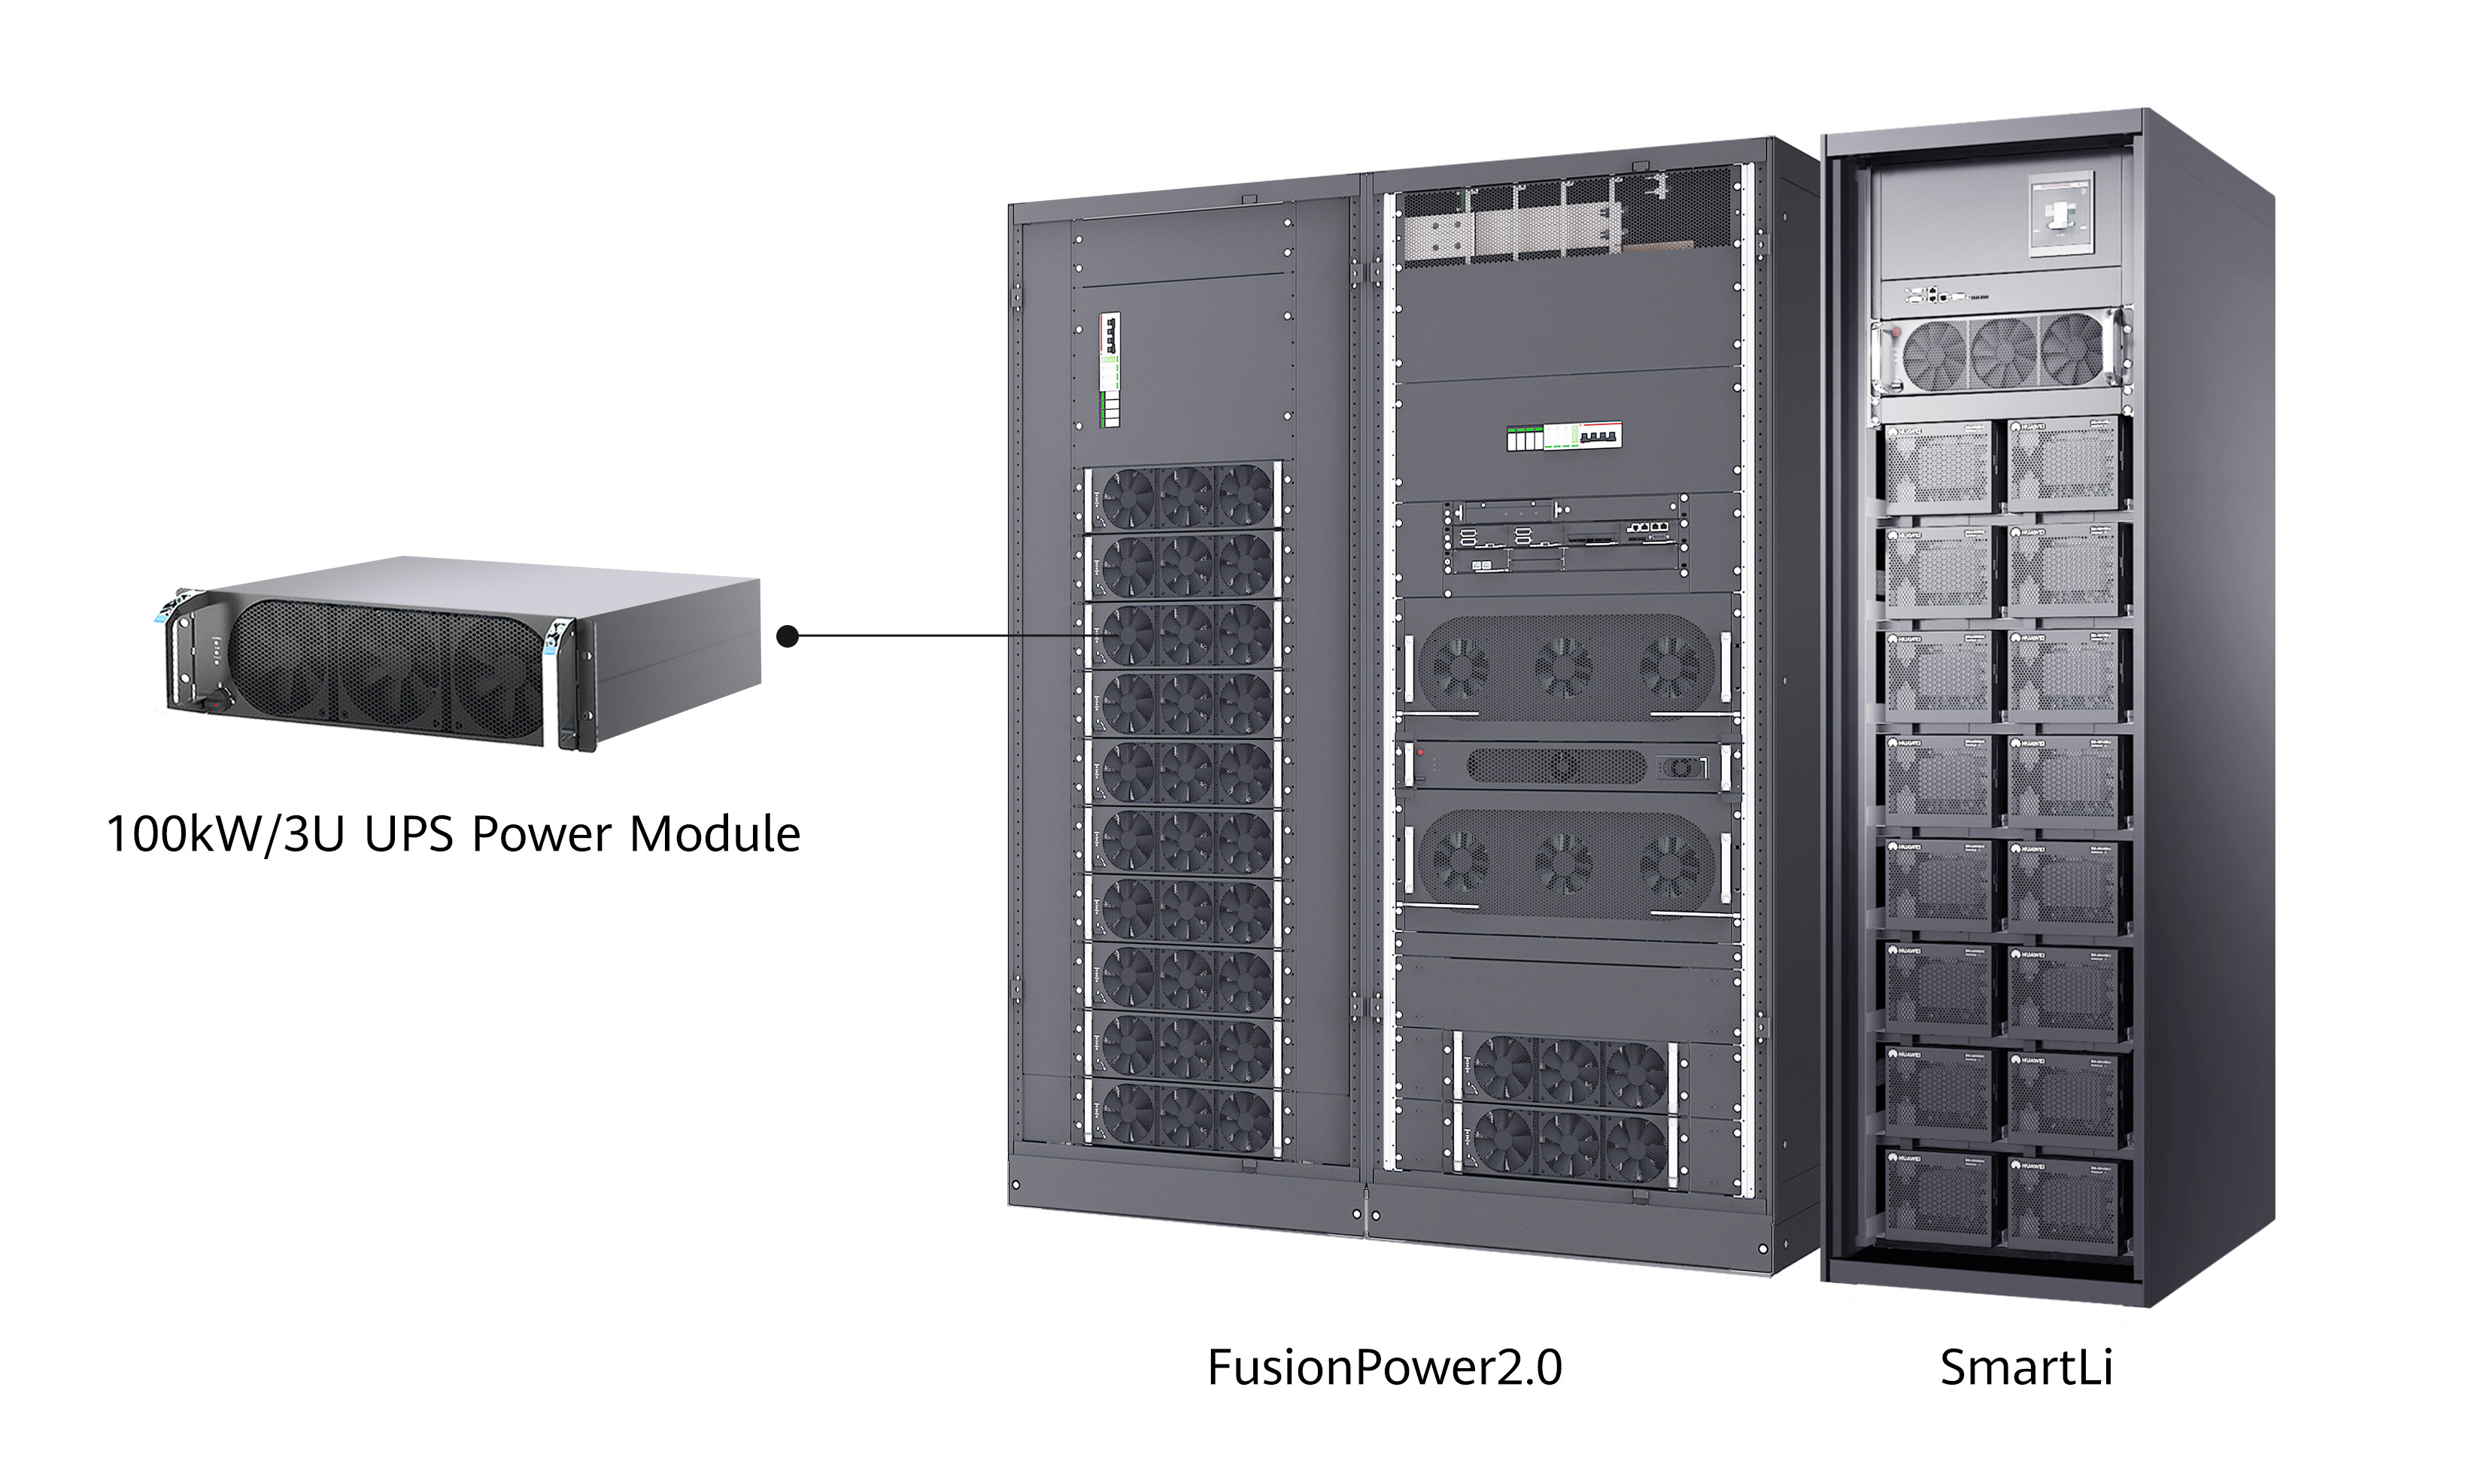 The SmartLi UPS Critical Power Supply Solution